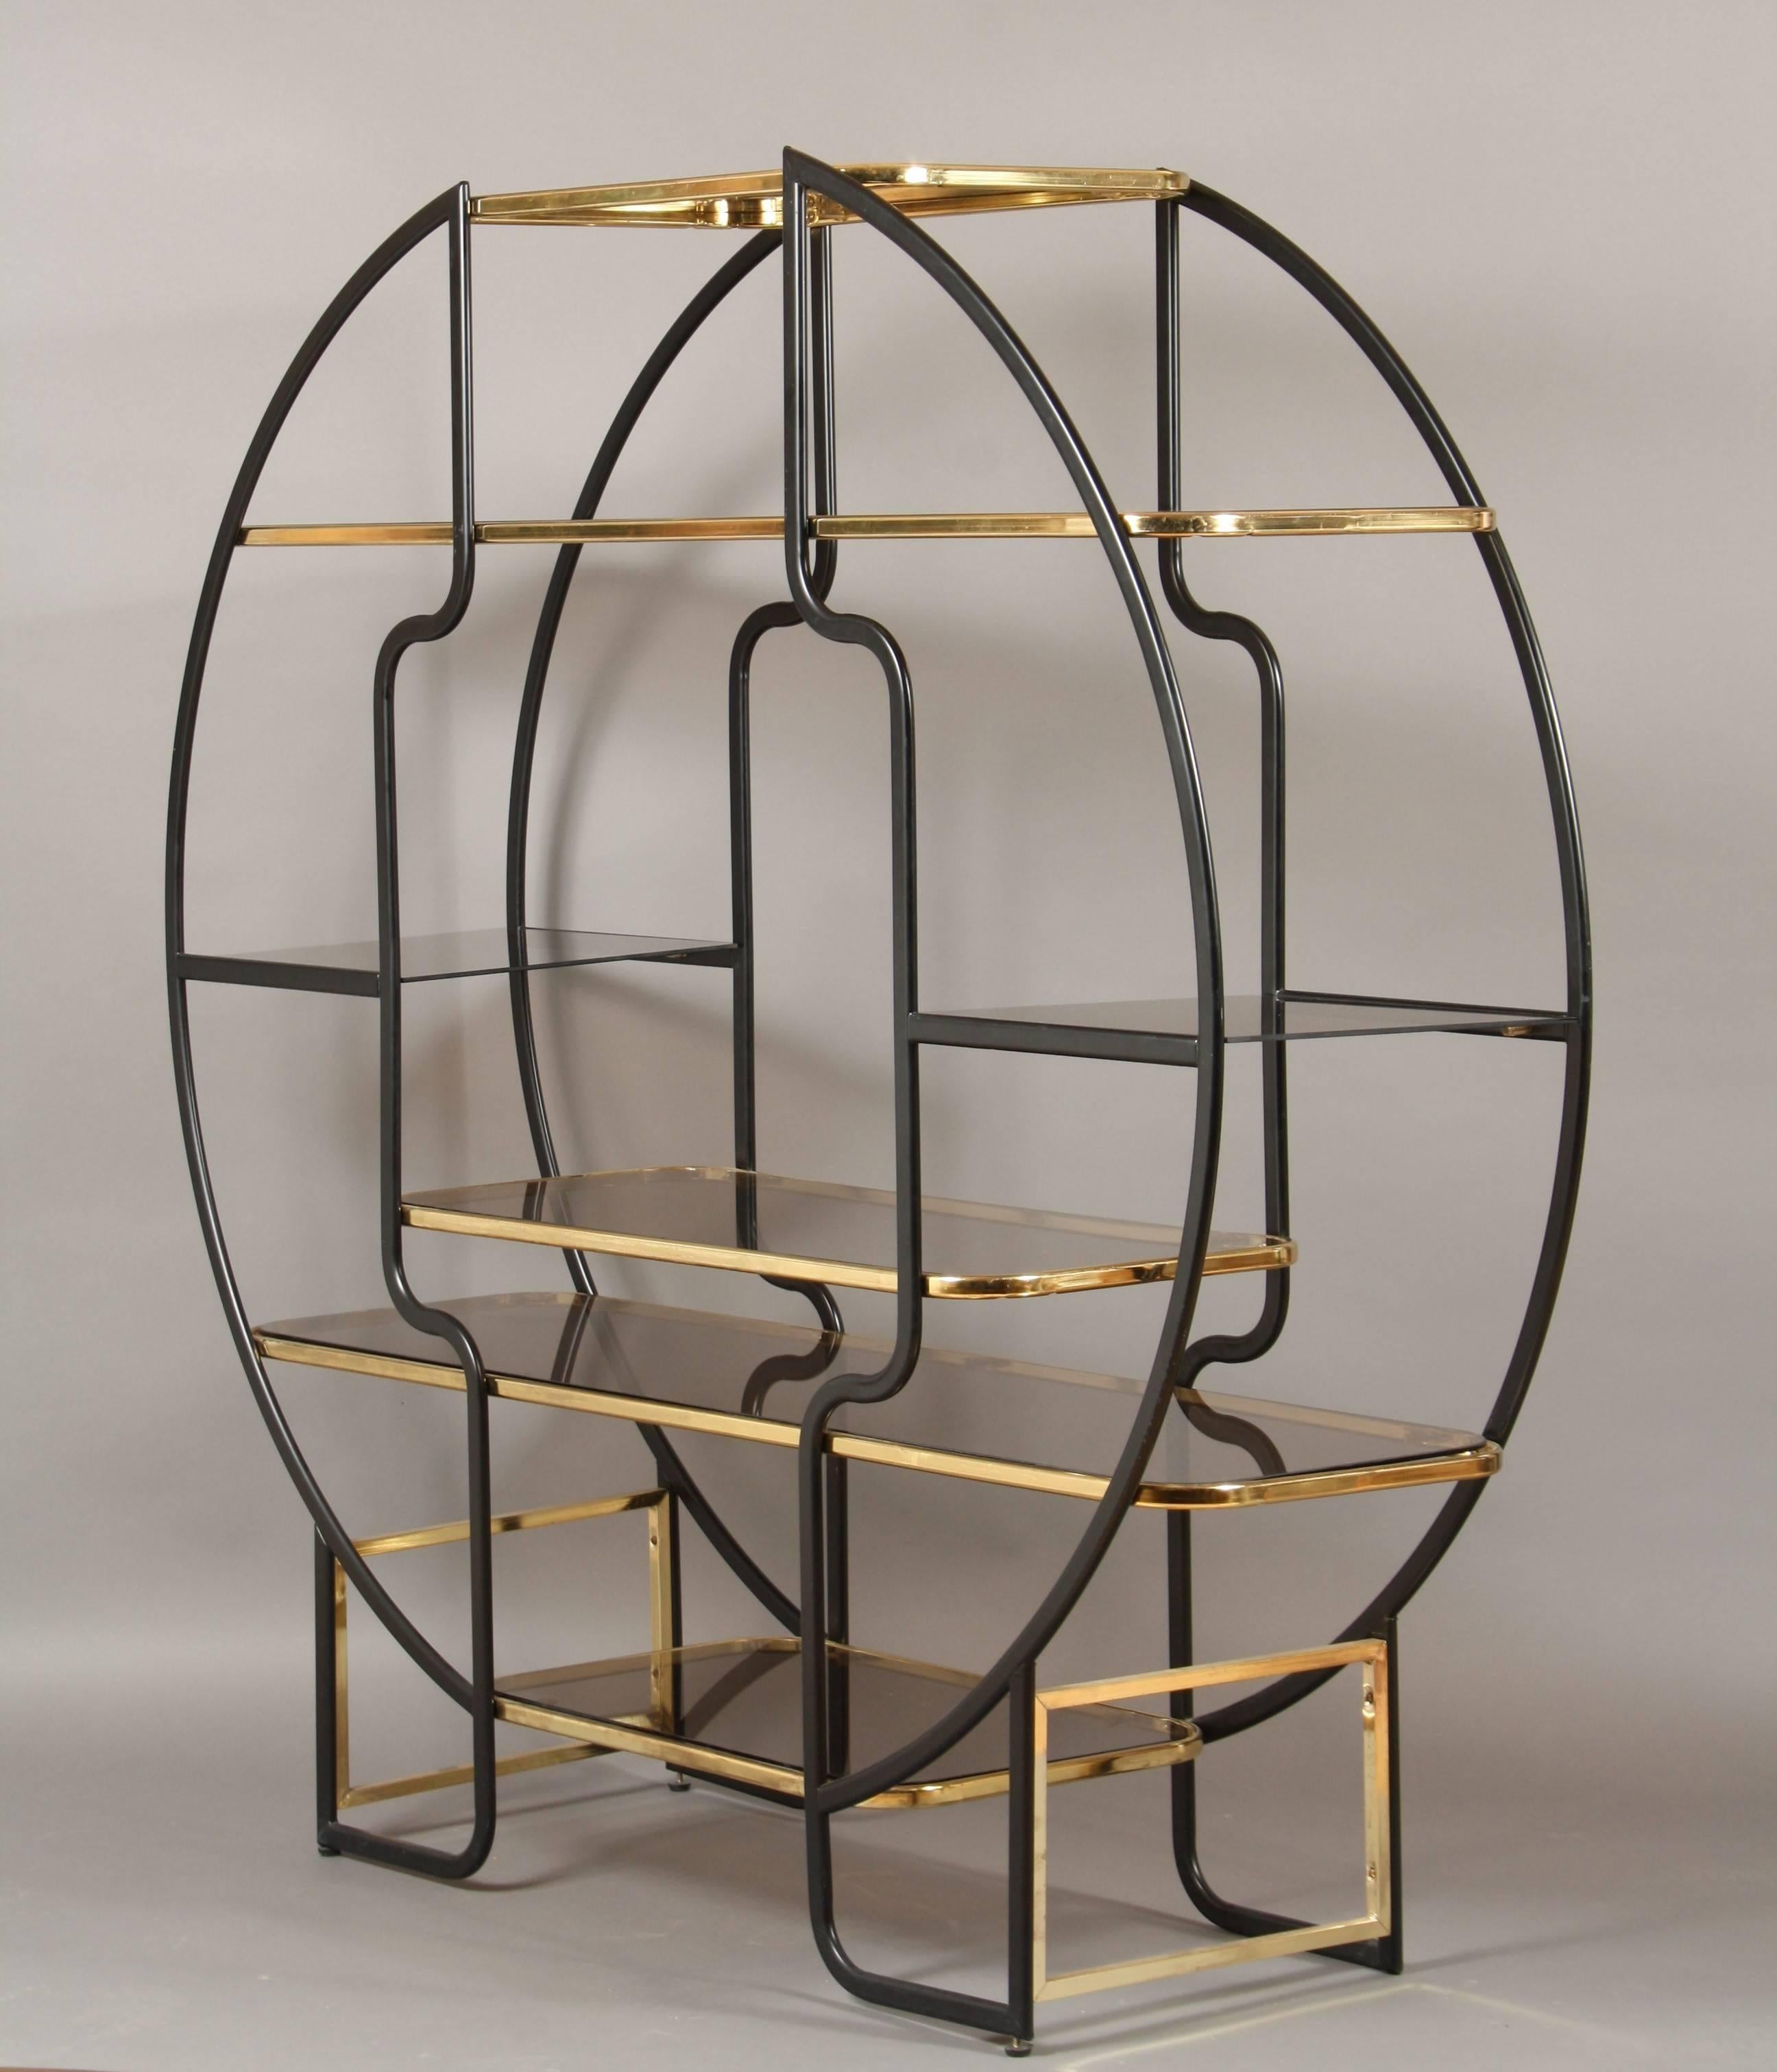 Art Deco bookcase from the 1970s.
Its two-sided frame constitutes a circle and is made of black colored metal. The two half-circles are tied together by shelves that are made of smoke-colored glass with a brass frame.
This extraordinary piece